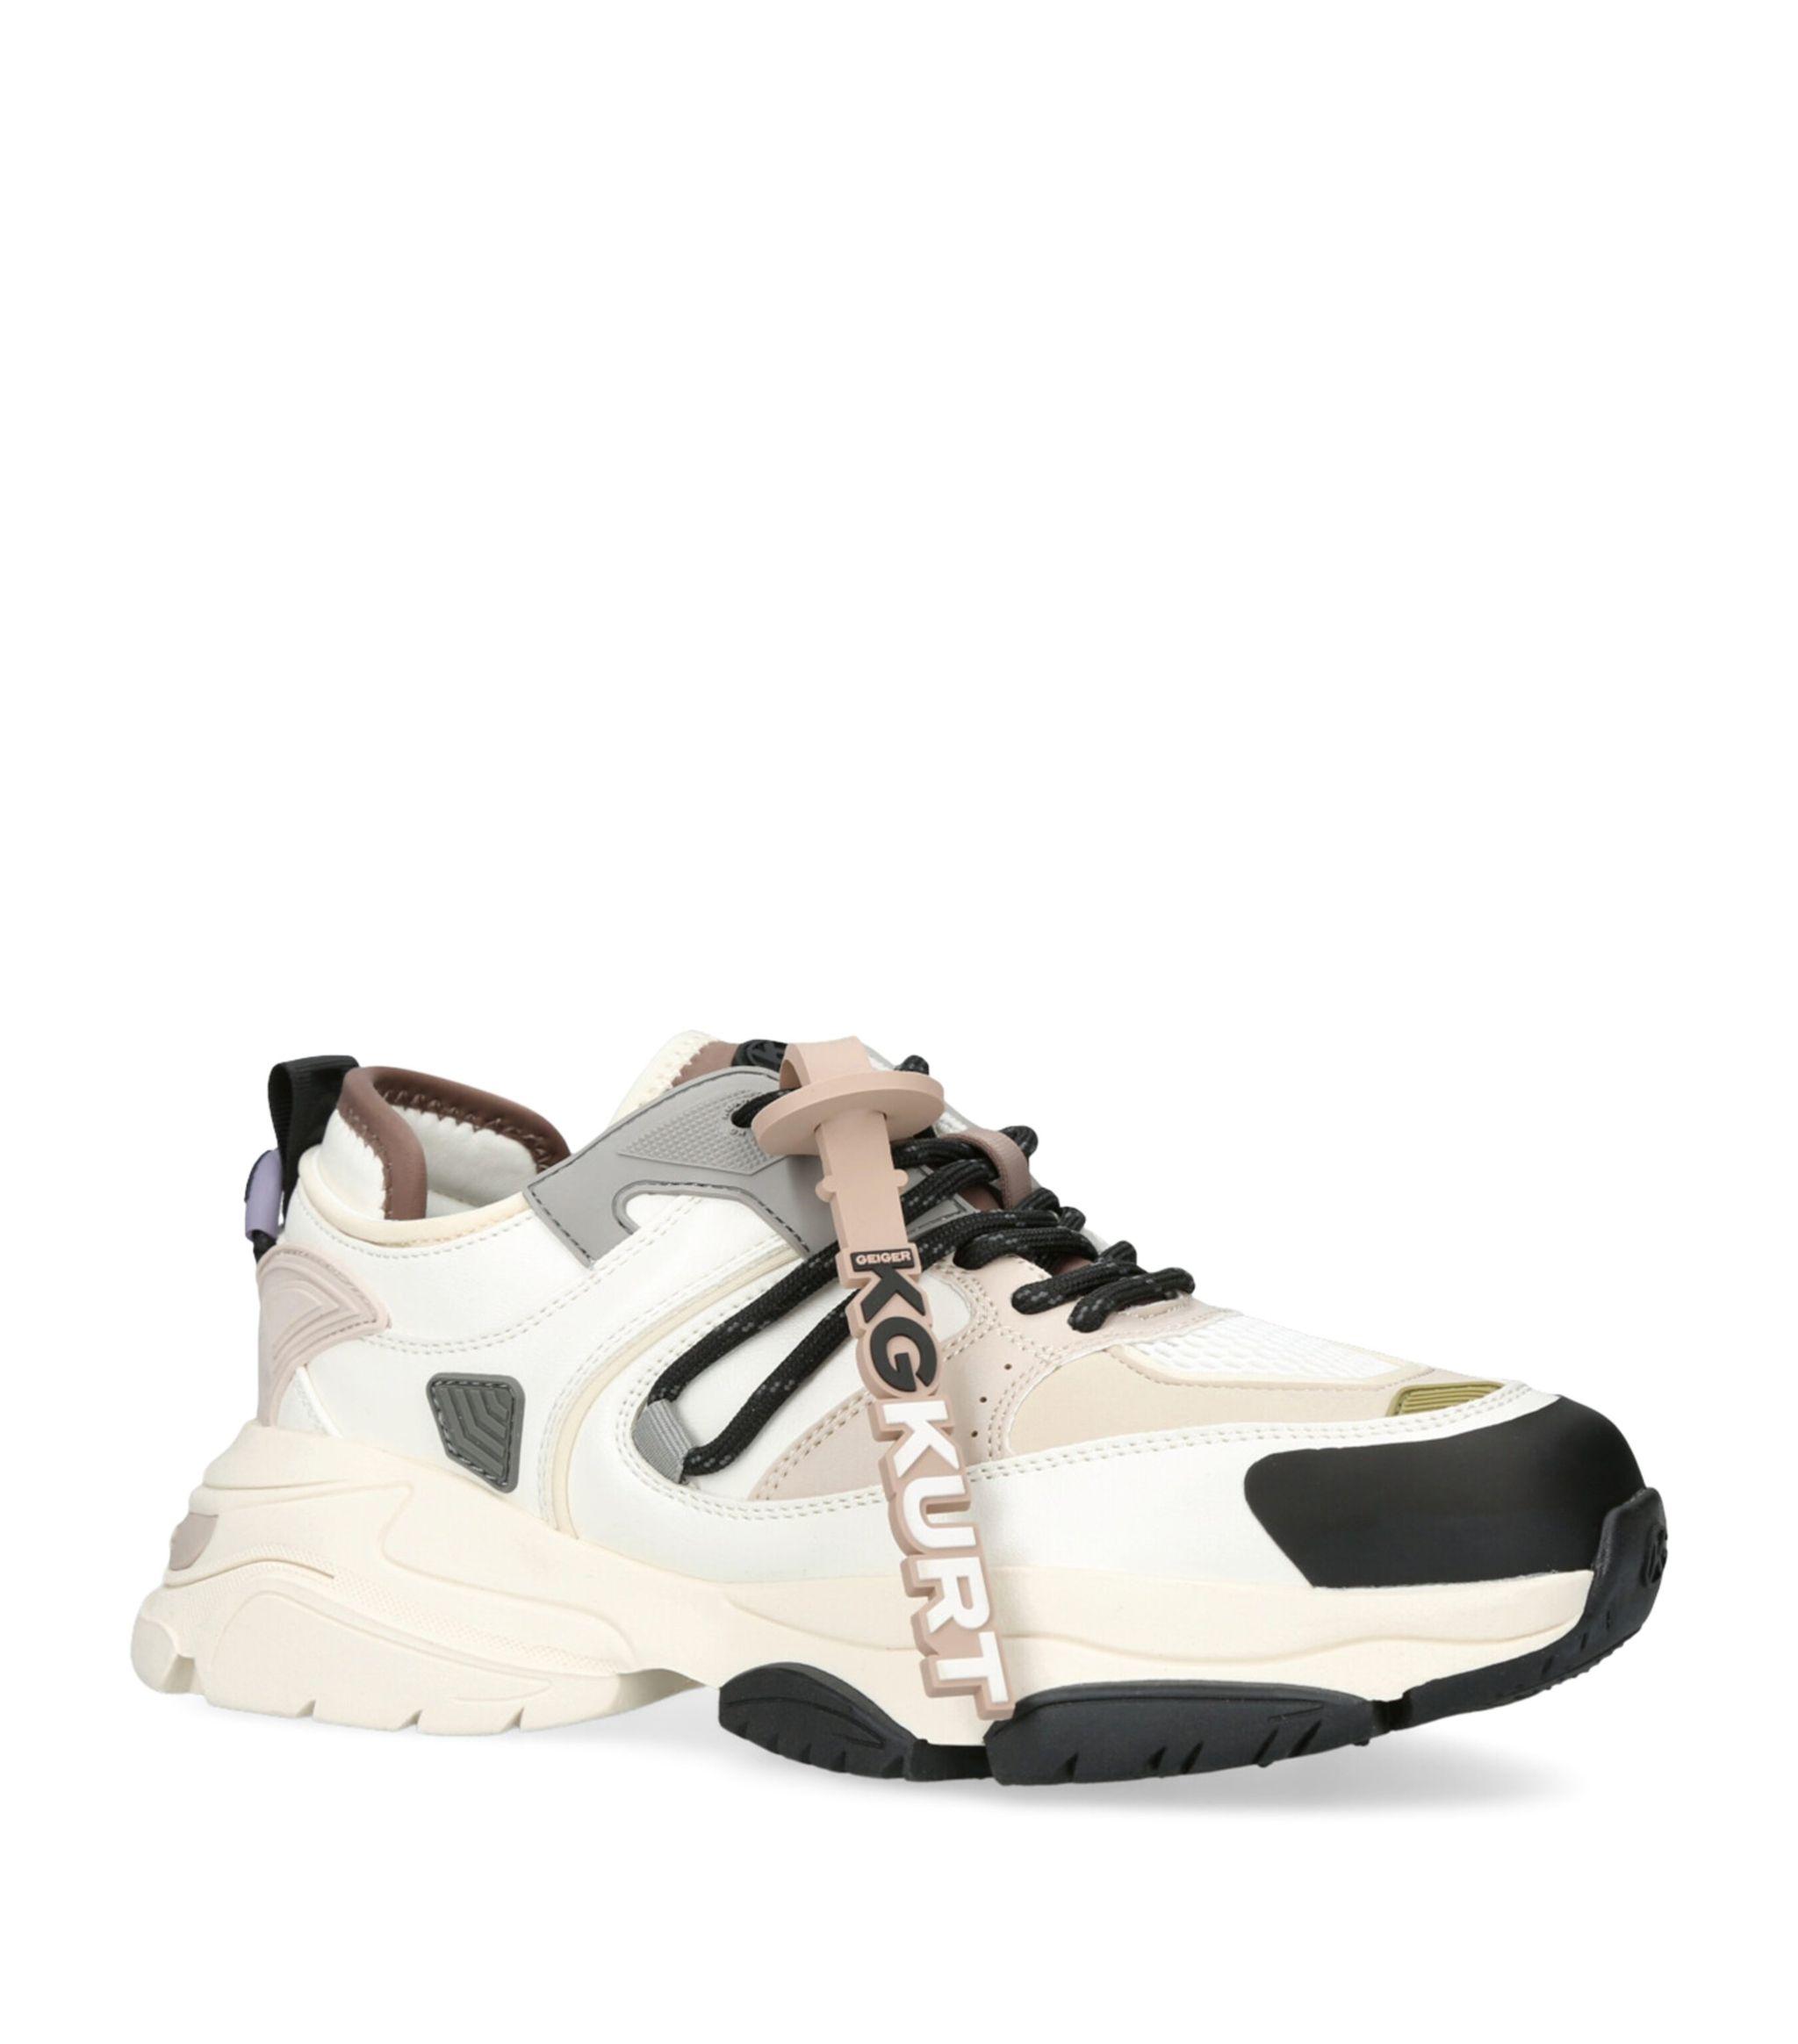 KG by Kurt Geiger Lennox Lace-up Trainers in White | Lyst